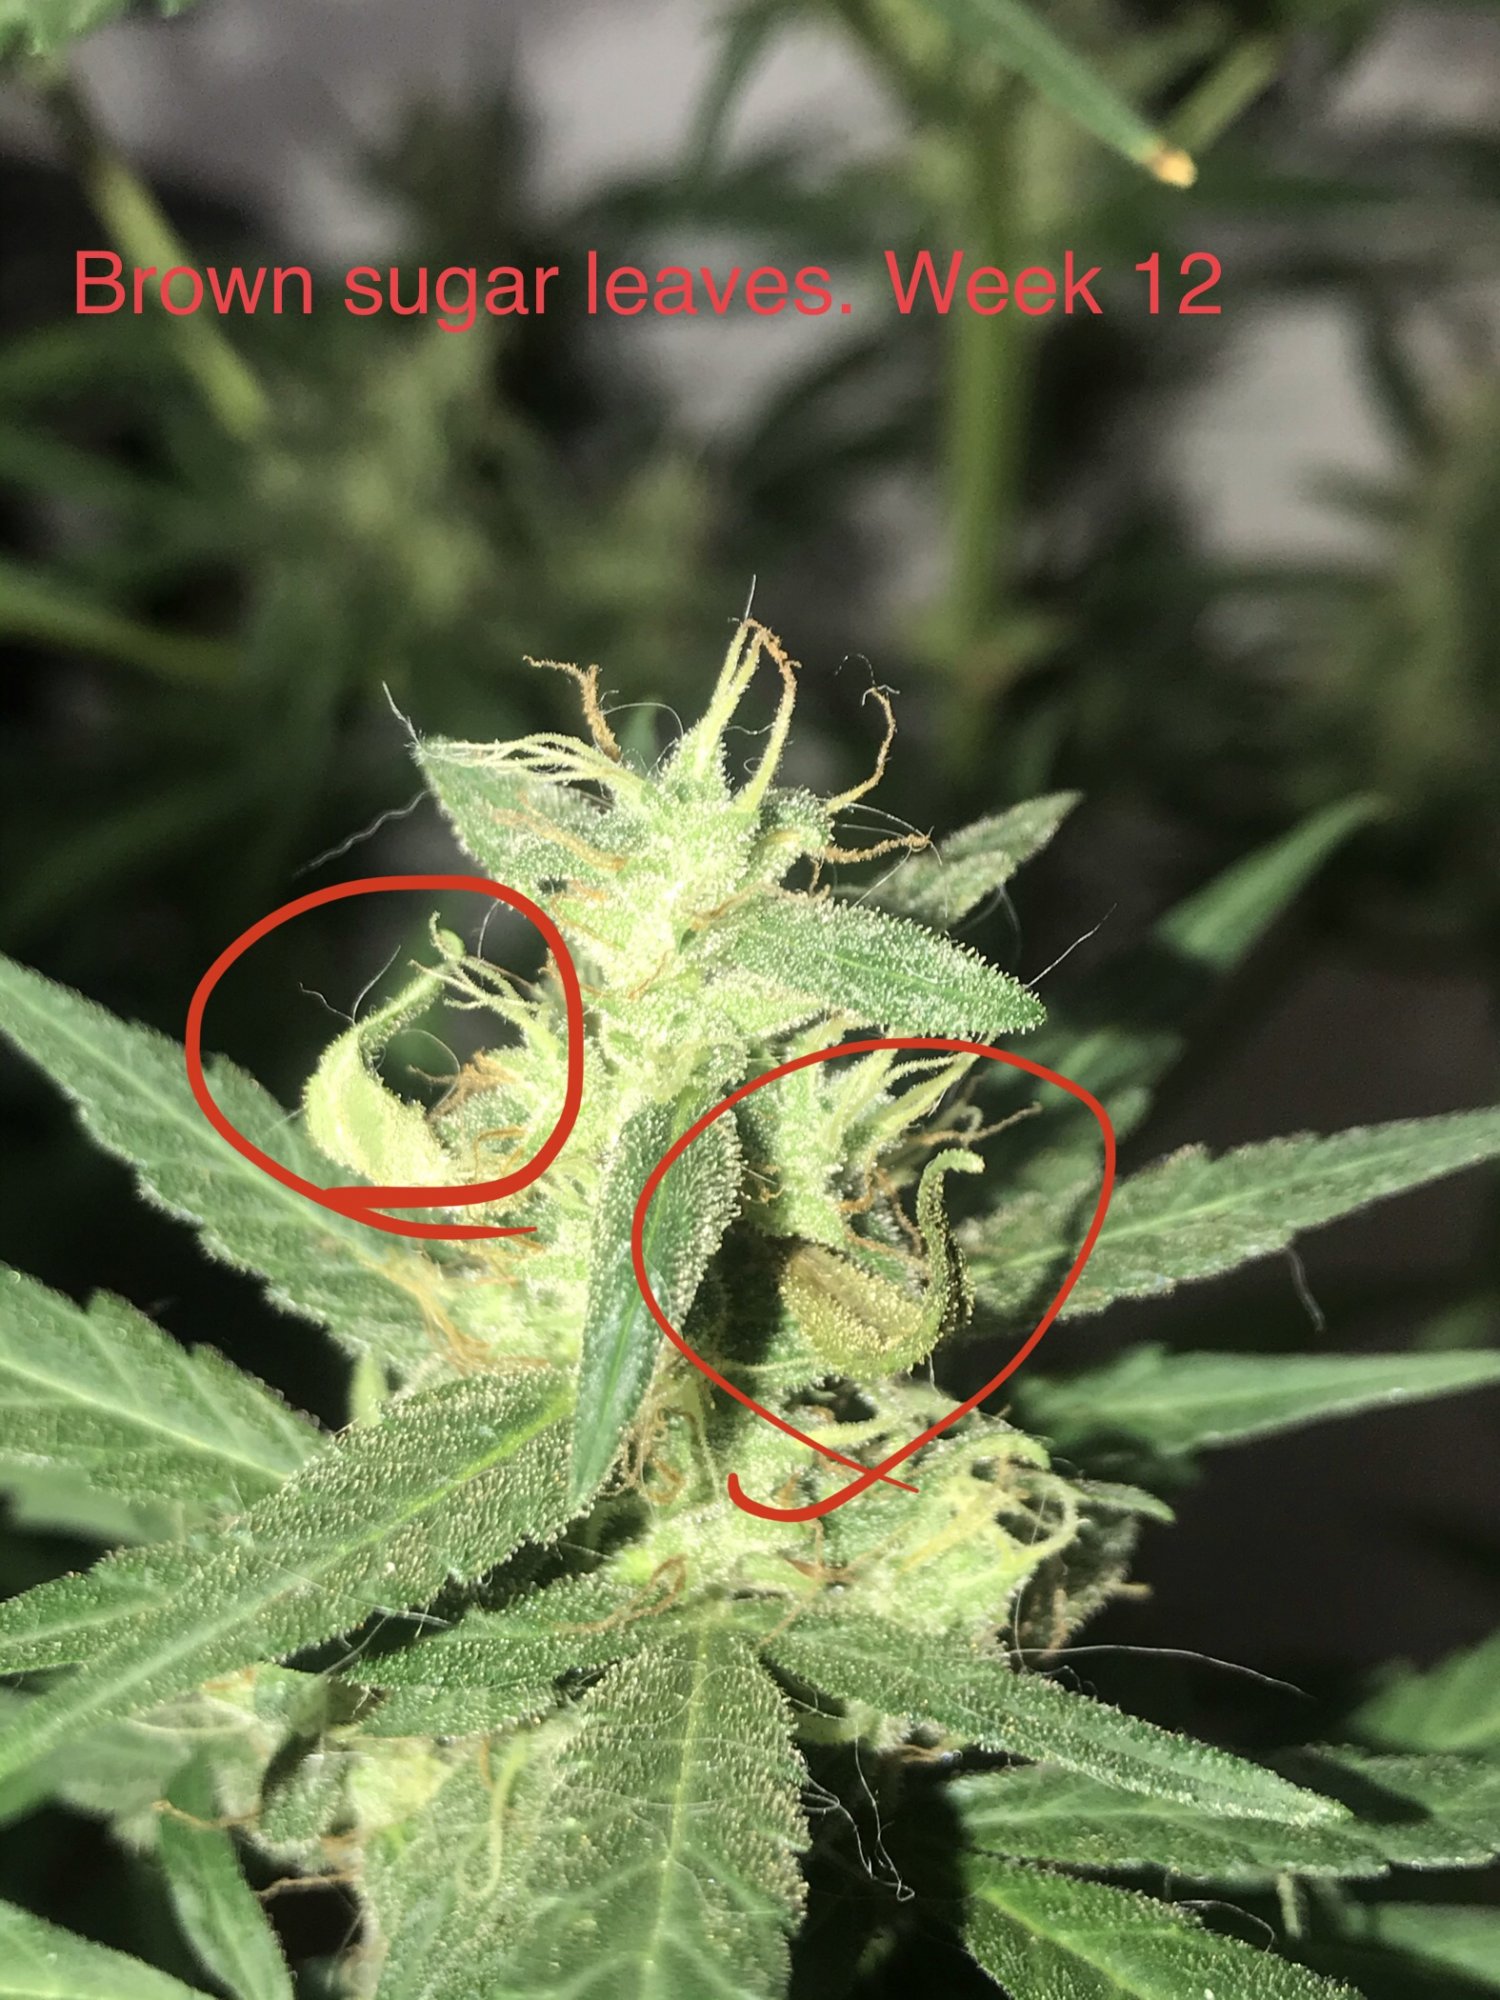 2 of my sugar leaves are dyingturning brown